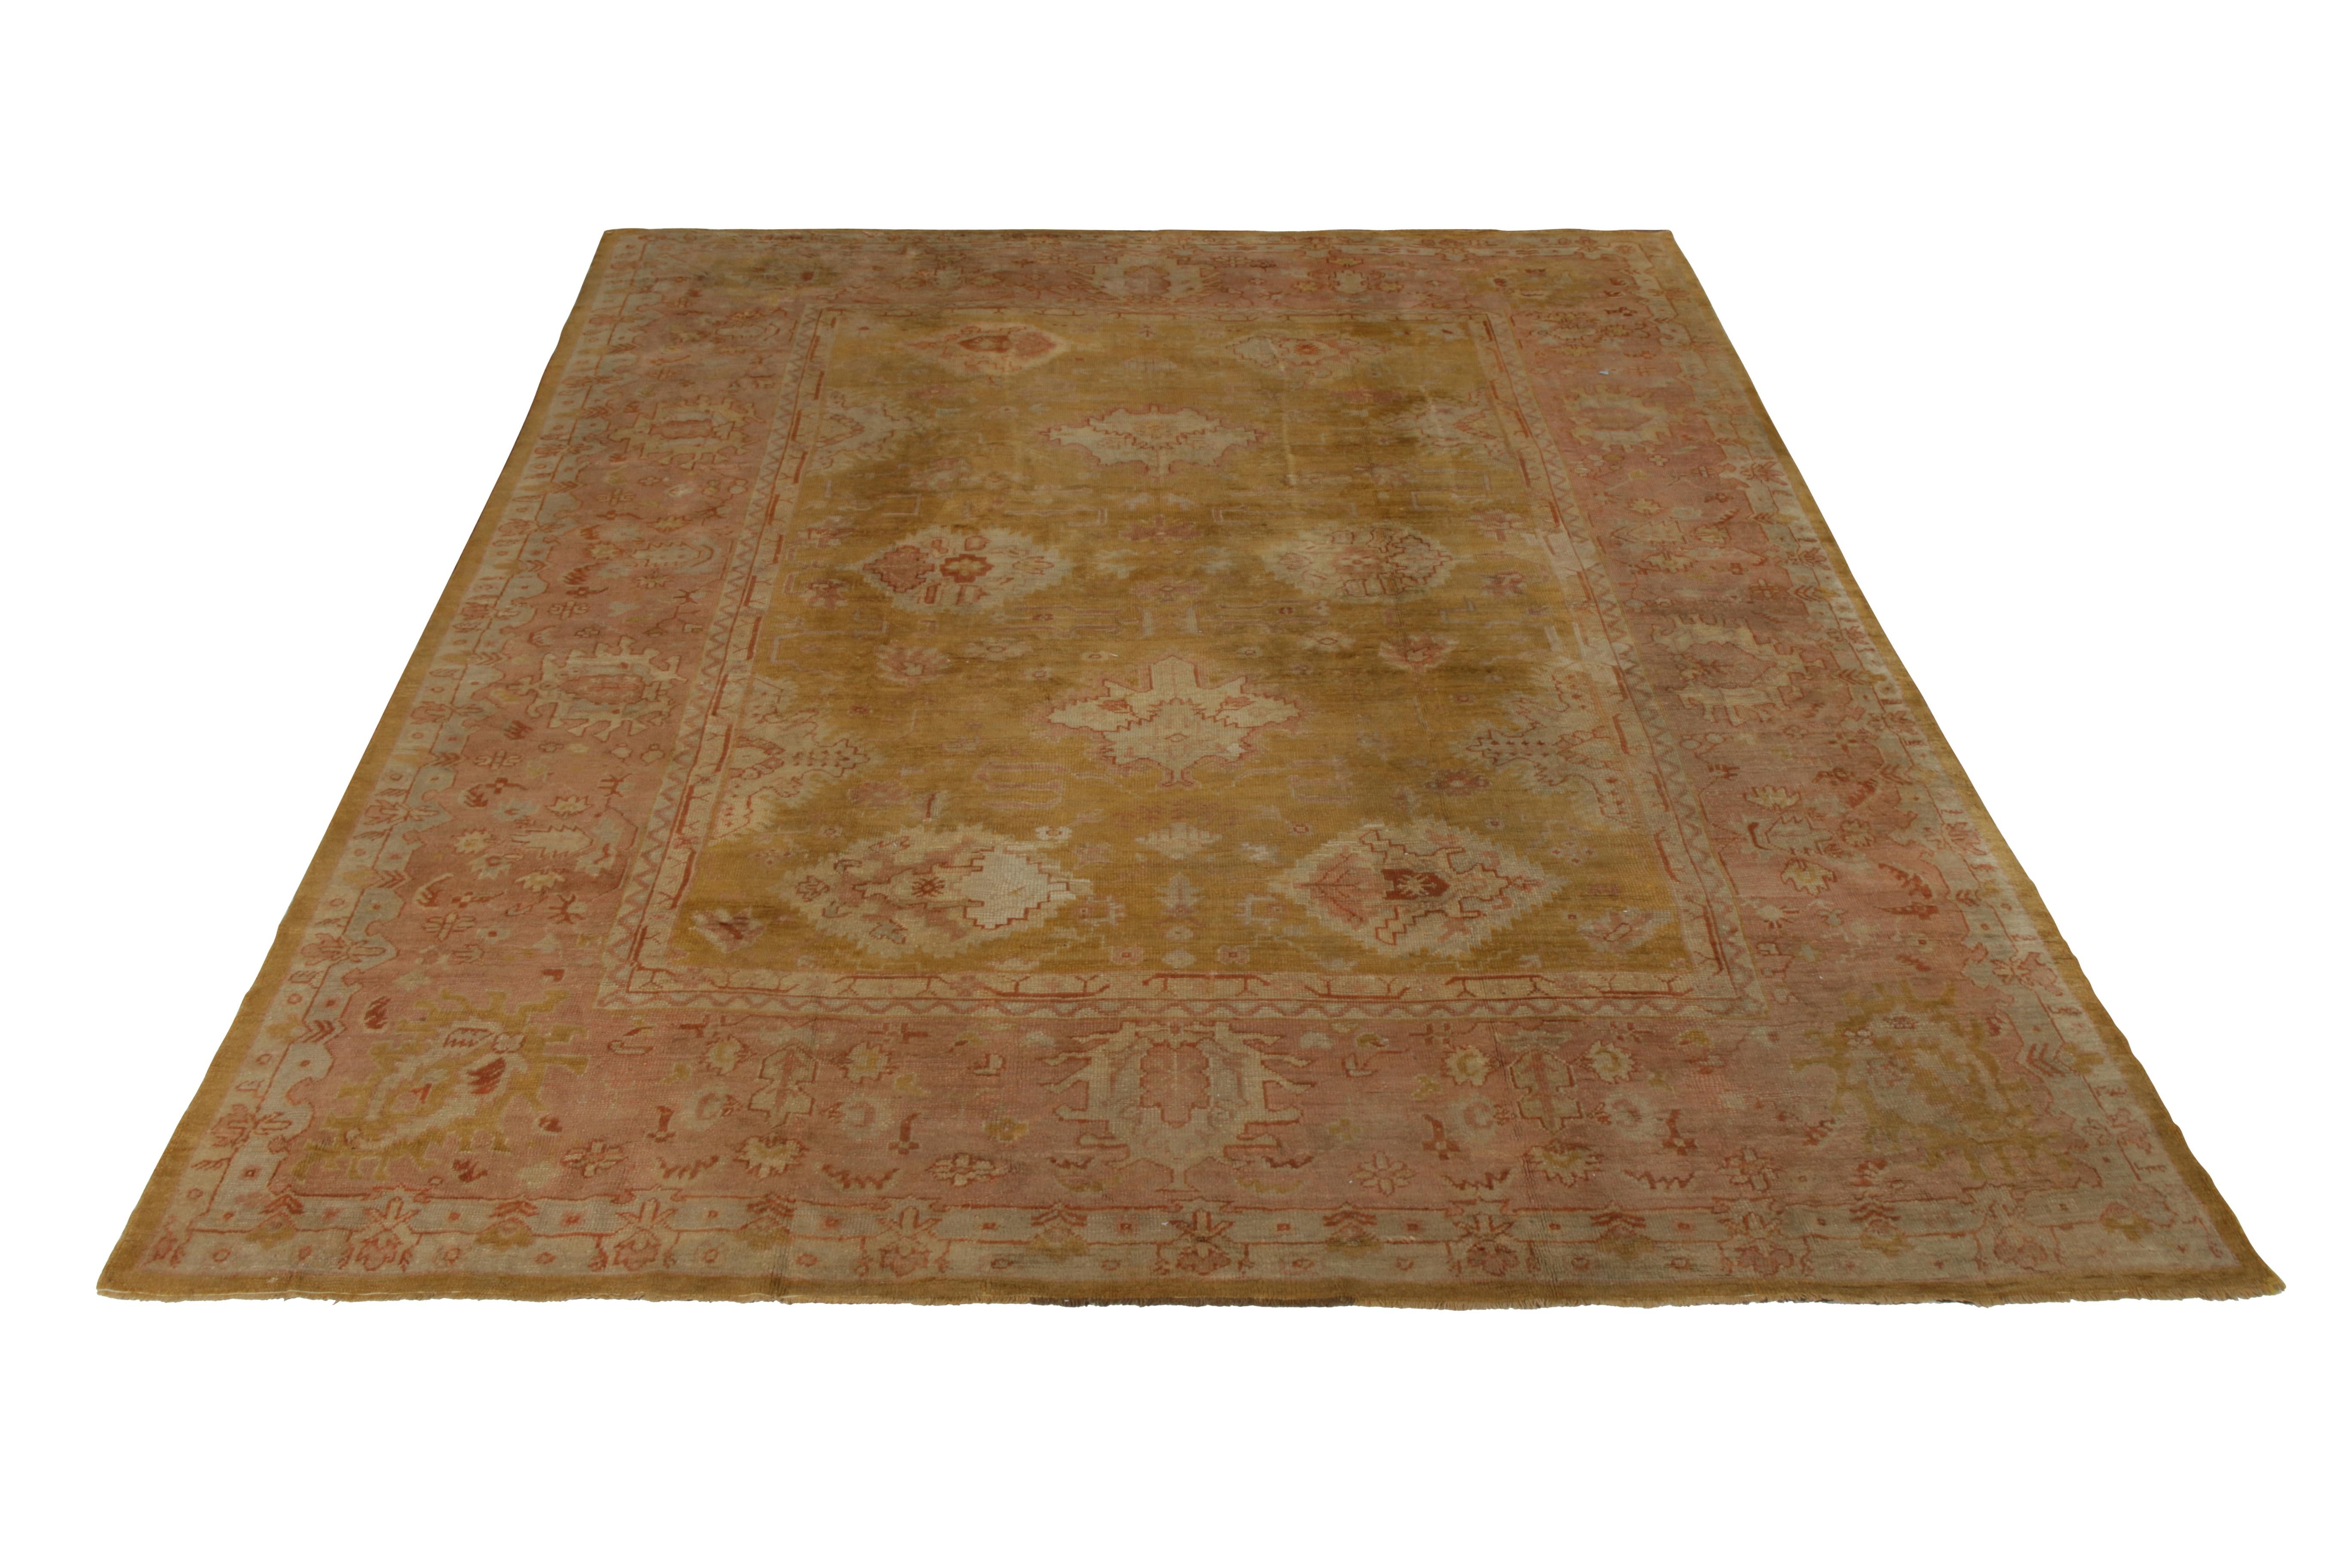 An antique 10x13 Oushak rug of magnificent pink and gold, hand knotted in wool originating from Turkey circa 1890-1900. 

On the Design: This particular antique Oushak rug is remarked by Josh as one of the most original and finely woven Oushaks of